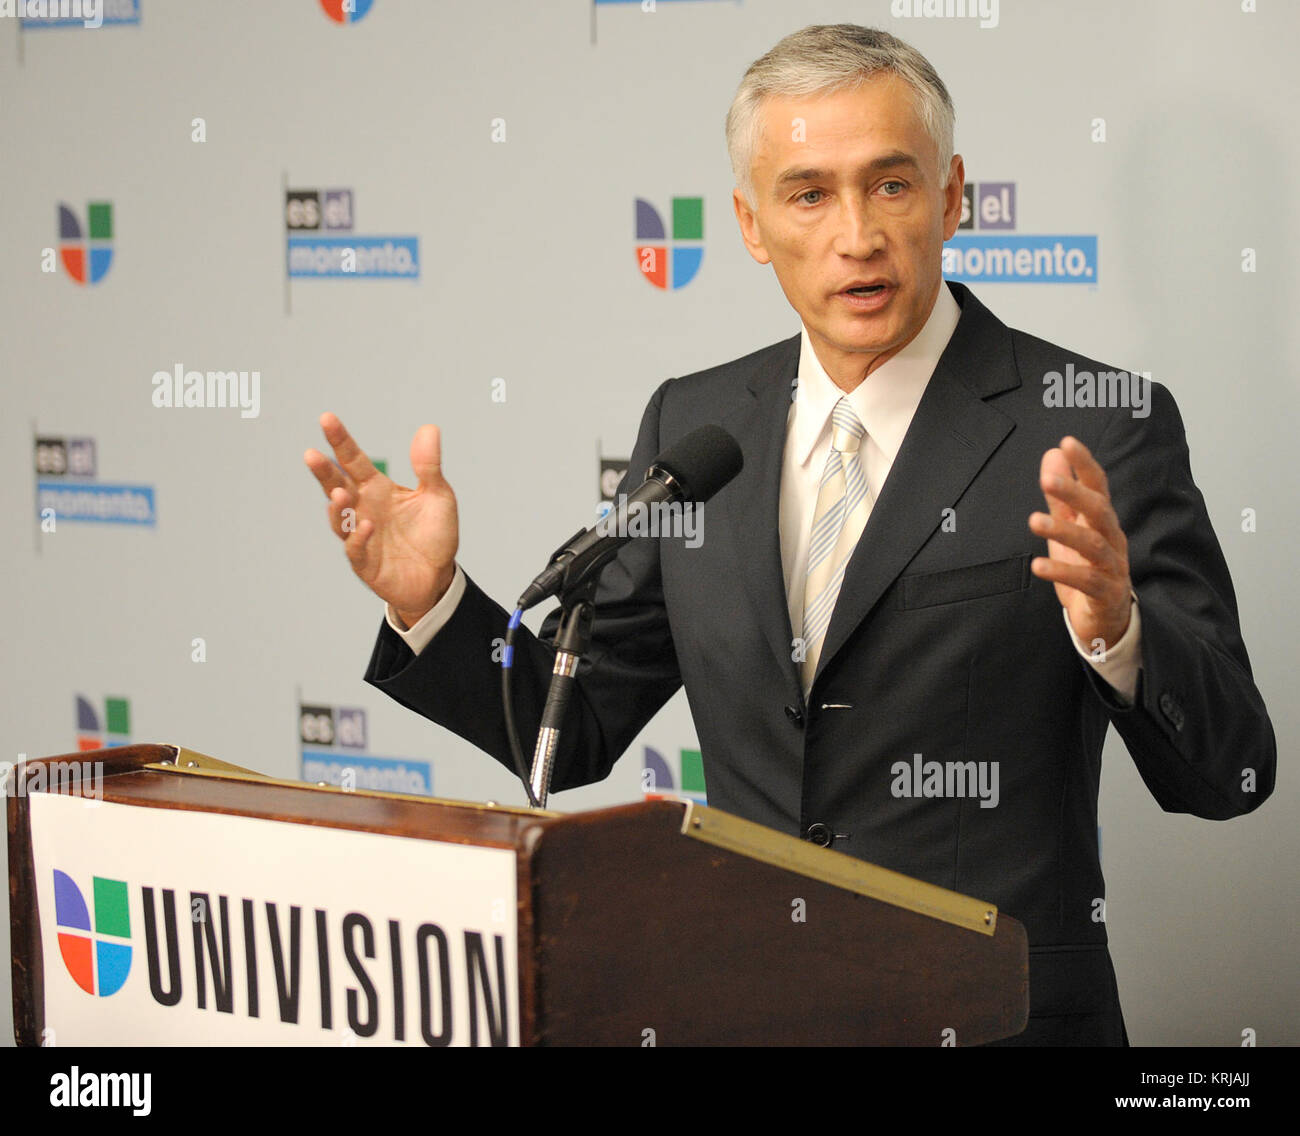 Univision news anchor Jorge Ramos speaks at an event at the National Press Club in Washington, Tuesday, Feb. 23, 2010. NASA is working with Univision Communications Inc. to develop a partnership in support of the Spanish-language media outlet's initiative to improve high school graduation rates, prepare Hispanic students for college, and encourage them to pursue careers in science, technology, engineering and mathematics, or STEM, disciplines.  Photo Credit: NASA/Bill Ingalls  NASA Identifier: 201002230007HQ NASA Univision Hispanic Education Campaign DVIDS858679 Stock Photo